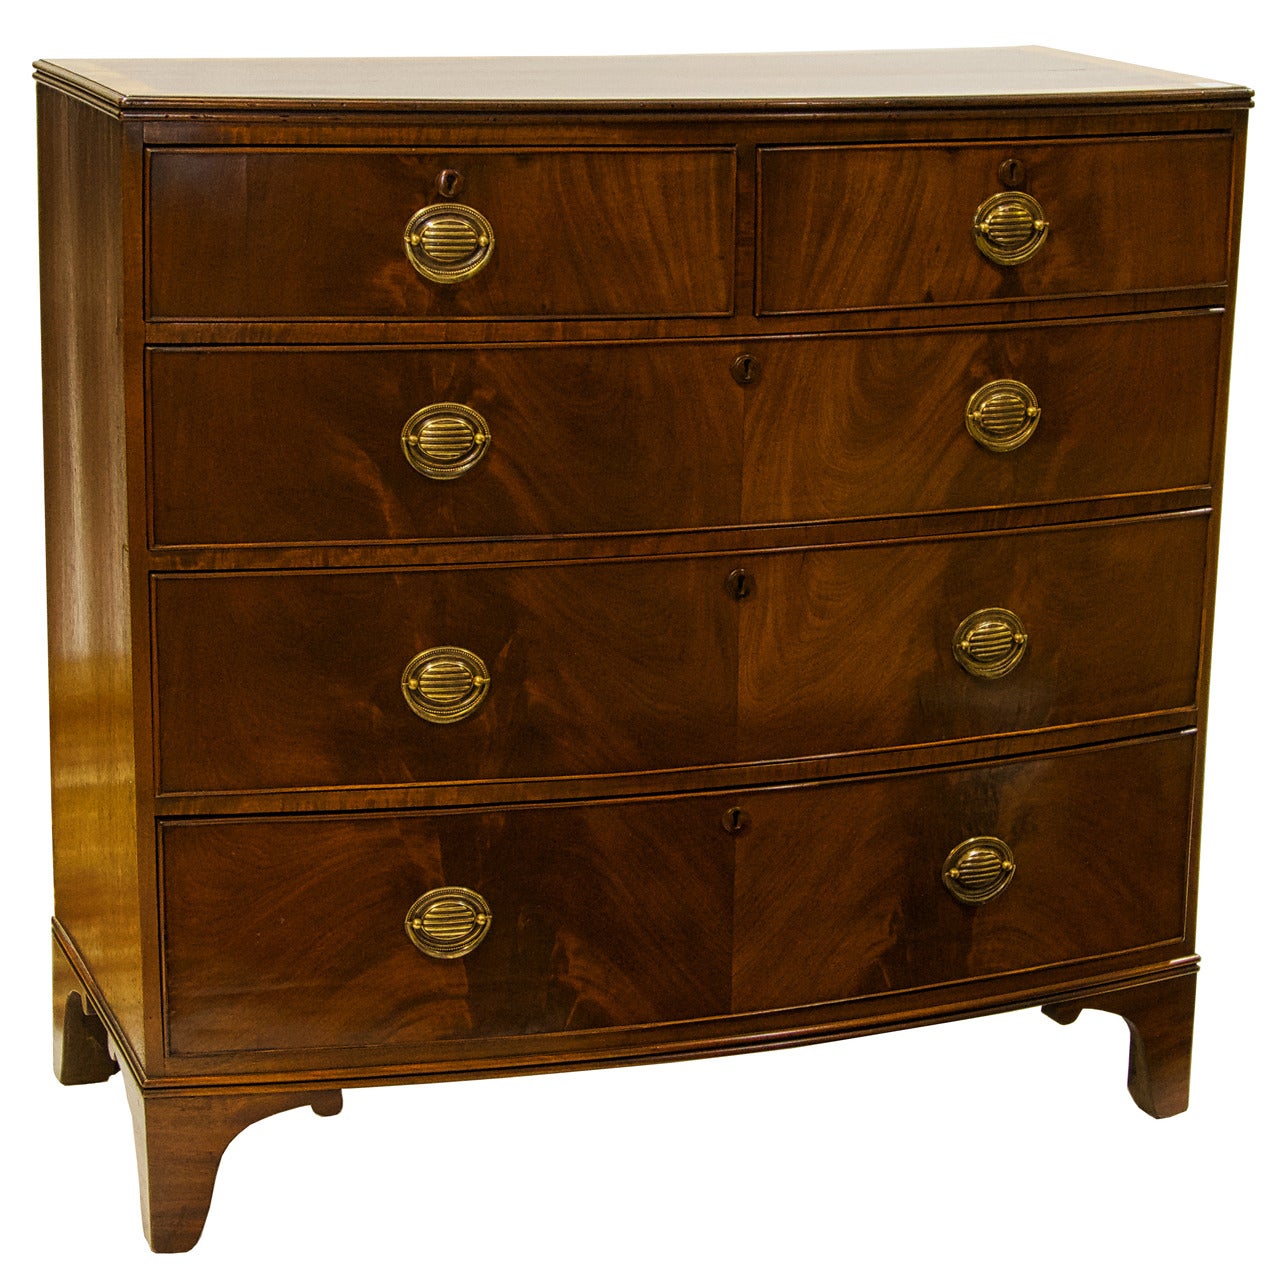 19th Century English Bow-Front Chest of Drawers